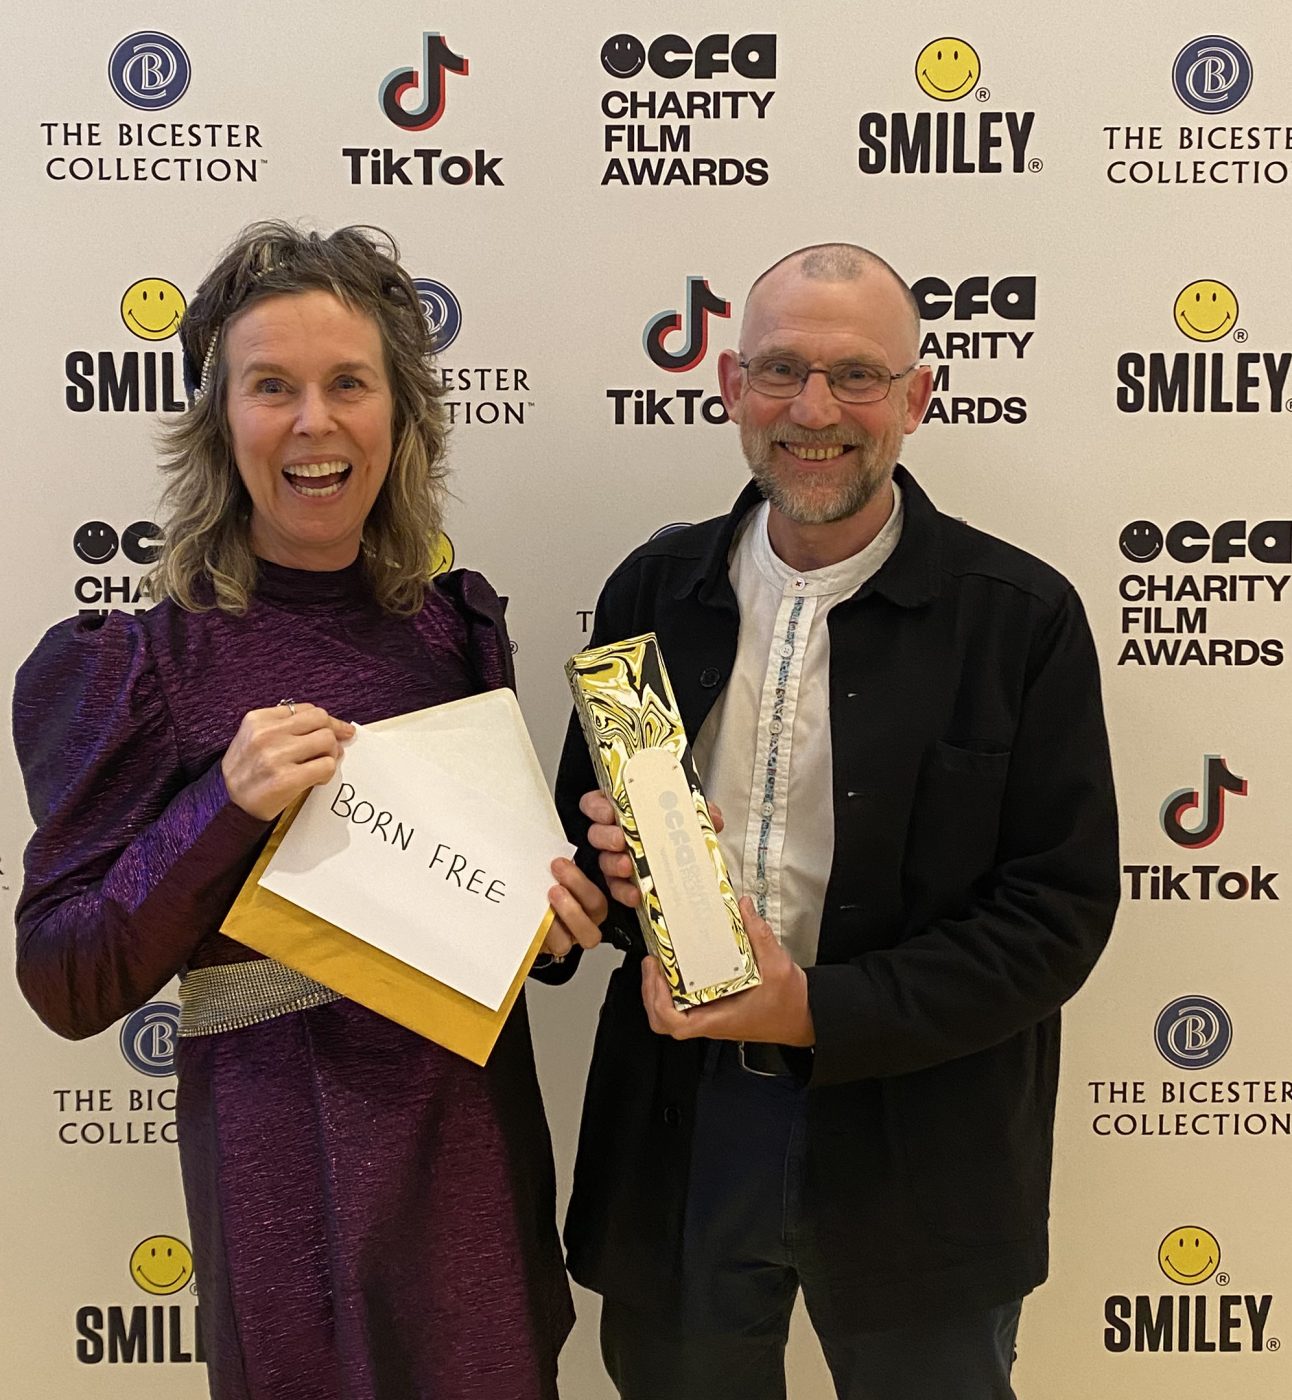 Celia Nicholls and Dr Mark Jones holding an envelope and gold award in front of a step and repeat board